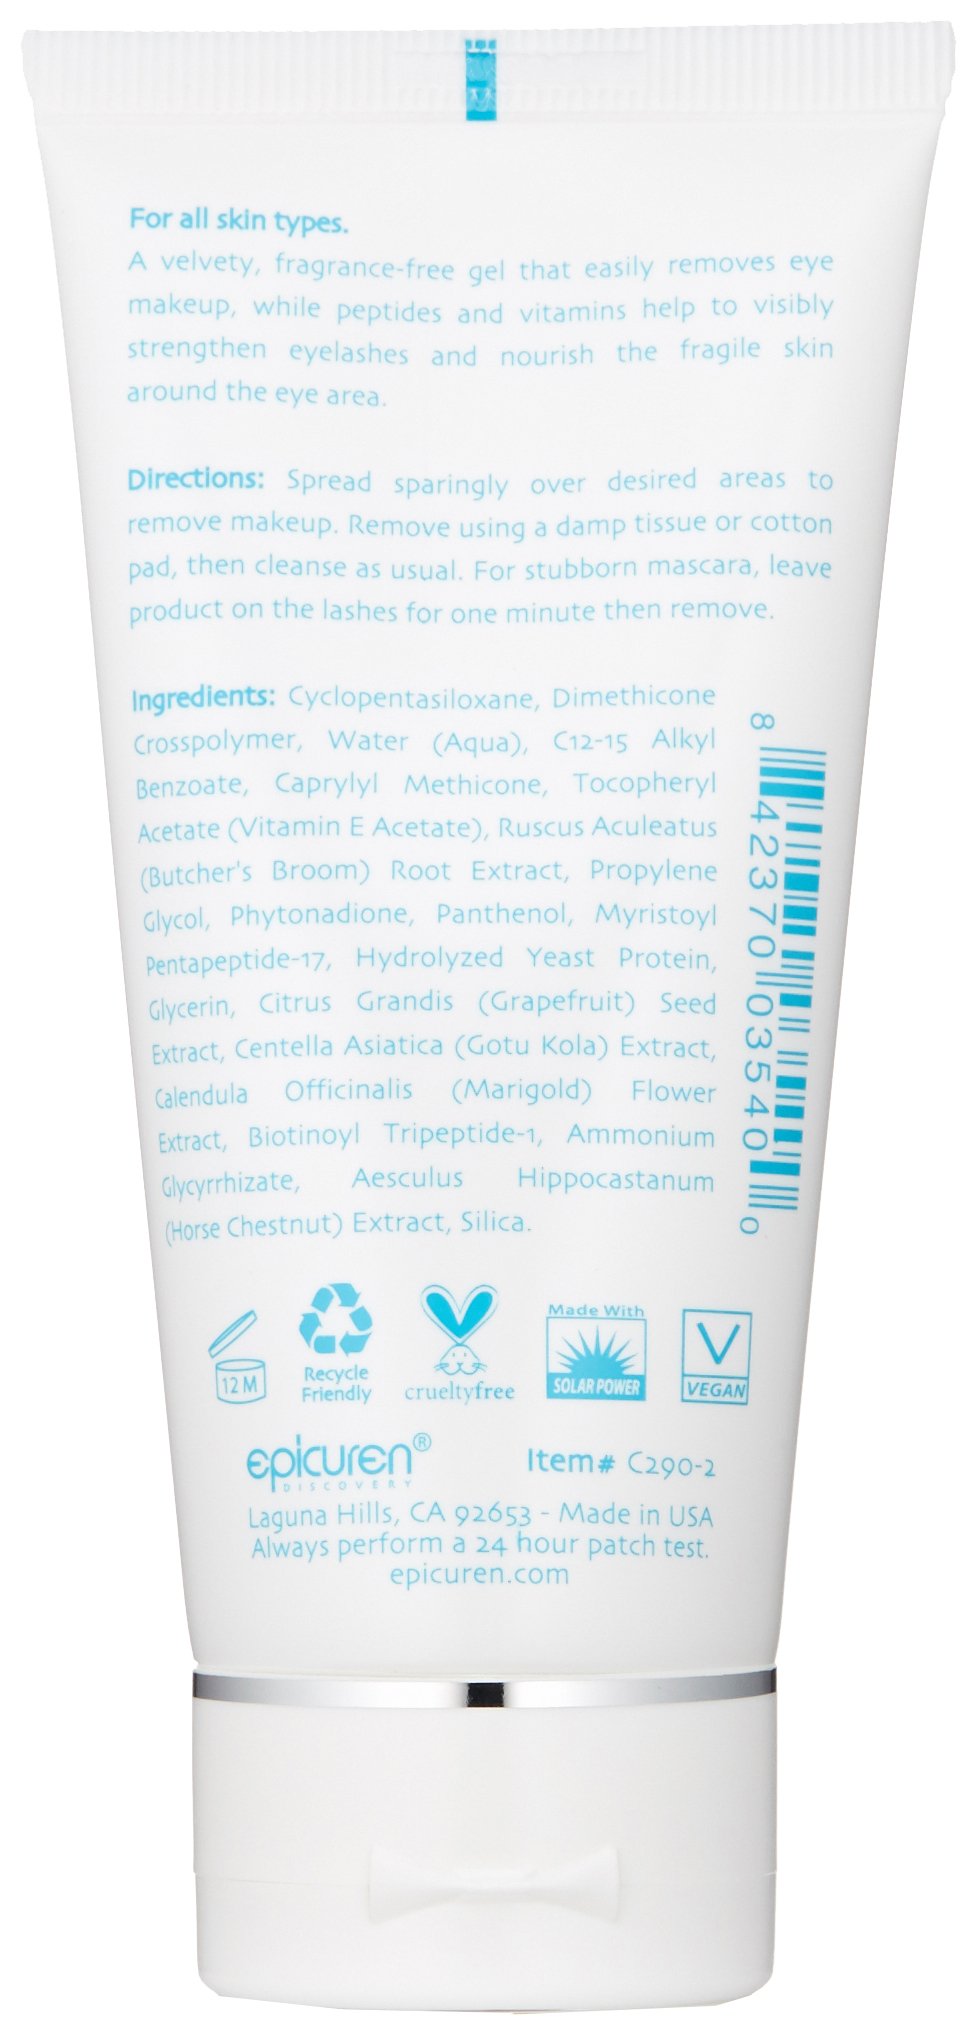 Epicuren Discovery Crystal Clear Eye Makeup Remover, 2.5 oz.